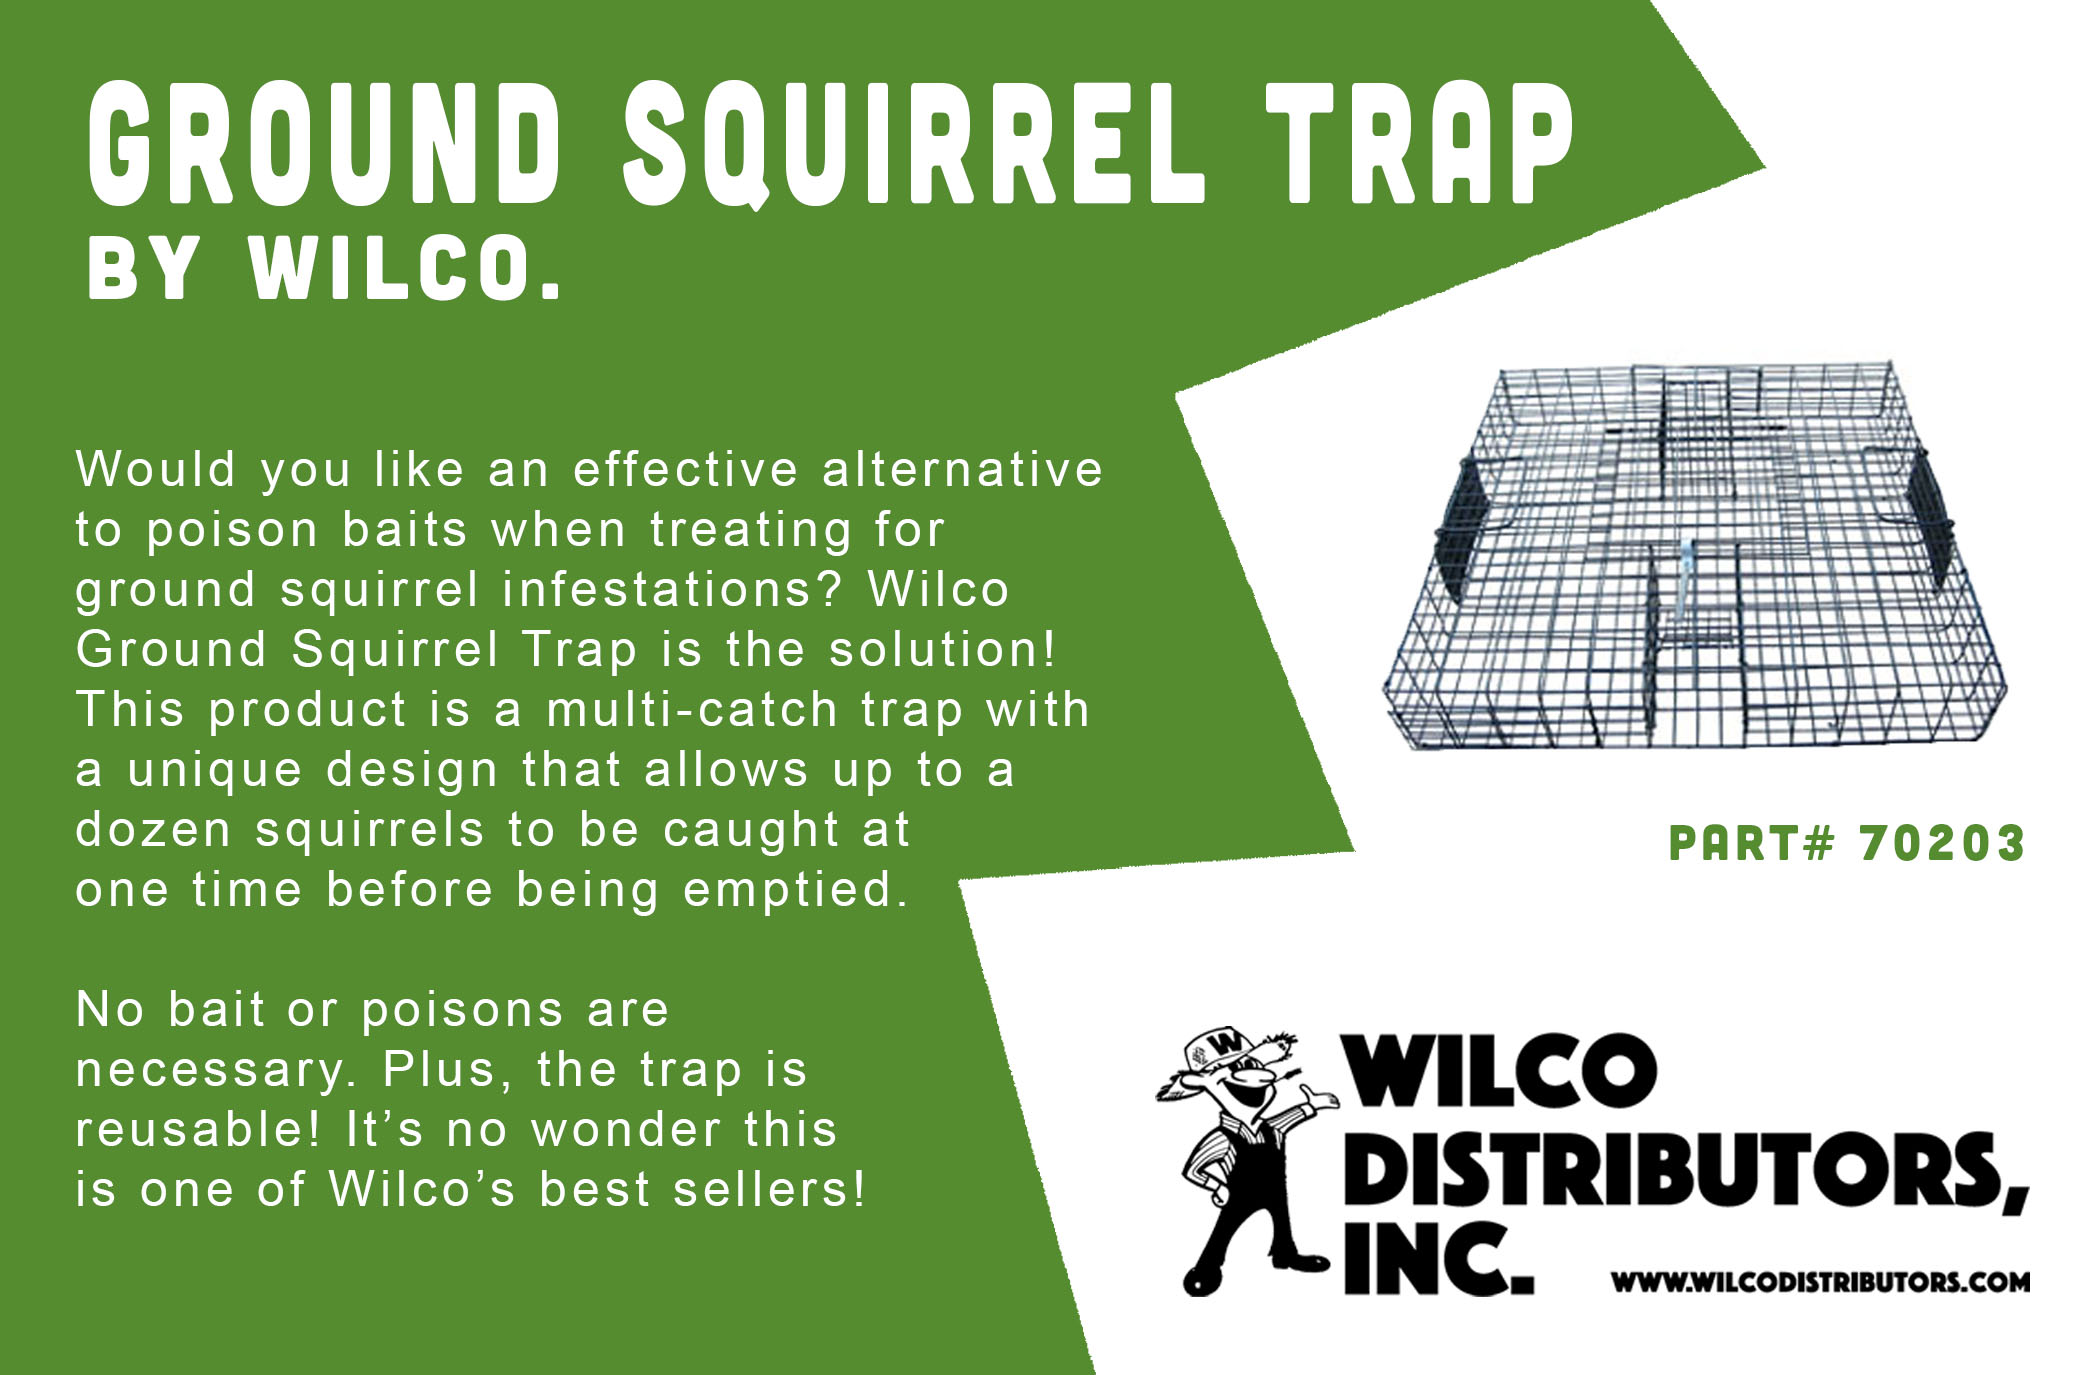 Try Our Ground Squirrel Trap!